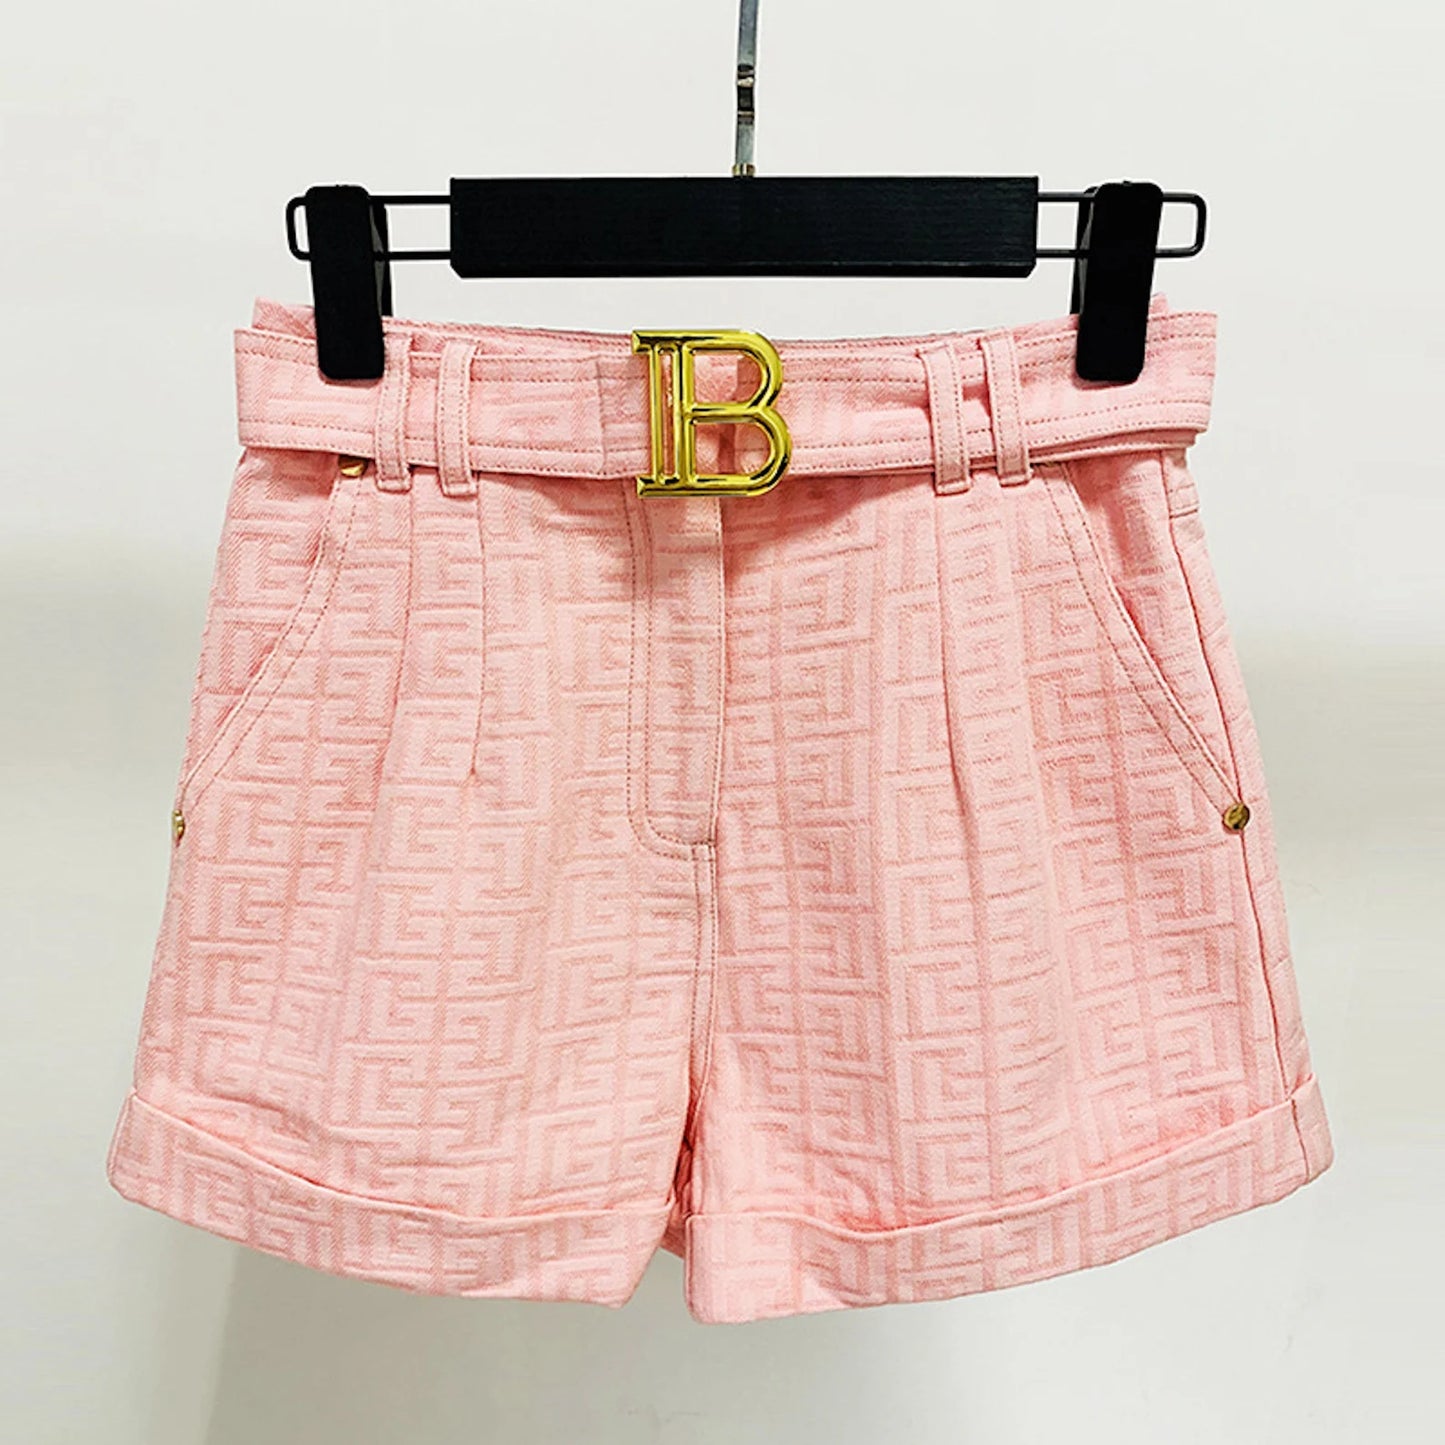 White Black Khaki Pink Colors 2022 Luxury Women's High Waist Belted Maze Pattern Shorts This High Waist Shorts is available in 4 different colours. For Holidays, Shopping, Parties, and other occasions, a basic T-shirt will complete your daily summer style. This shorts are elegant and comfy thanks to the maze pattern and belt. The high waistline slims you down and accentuates your curves.